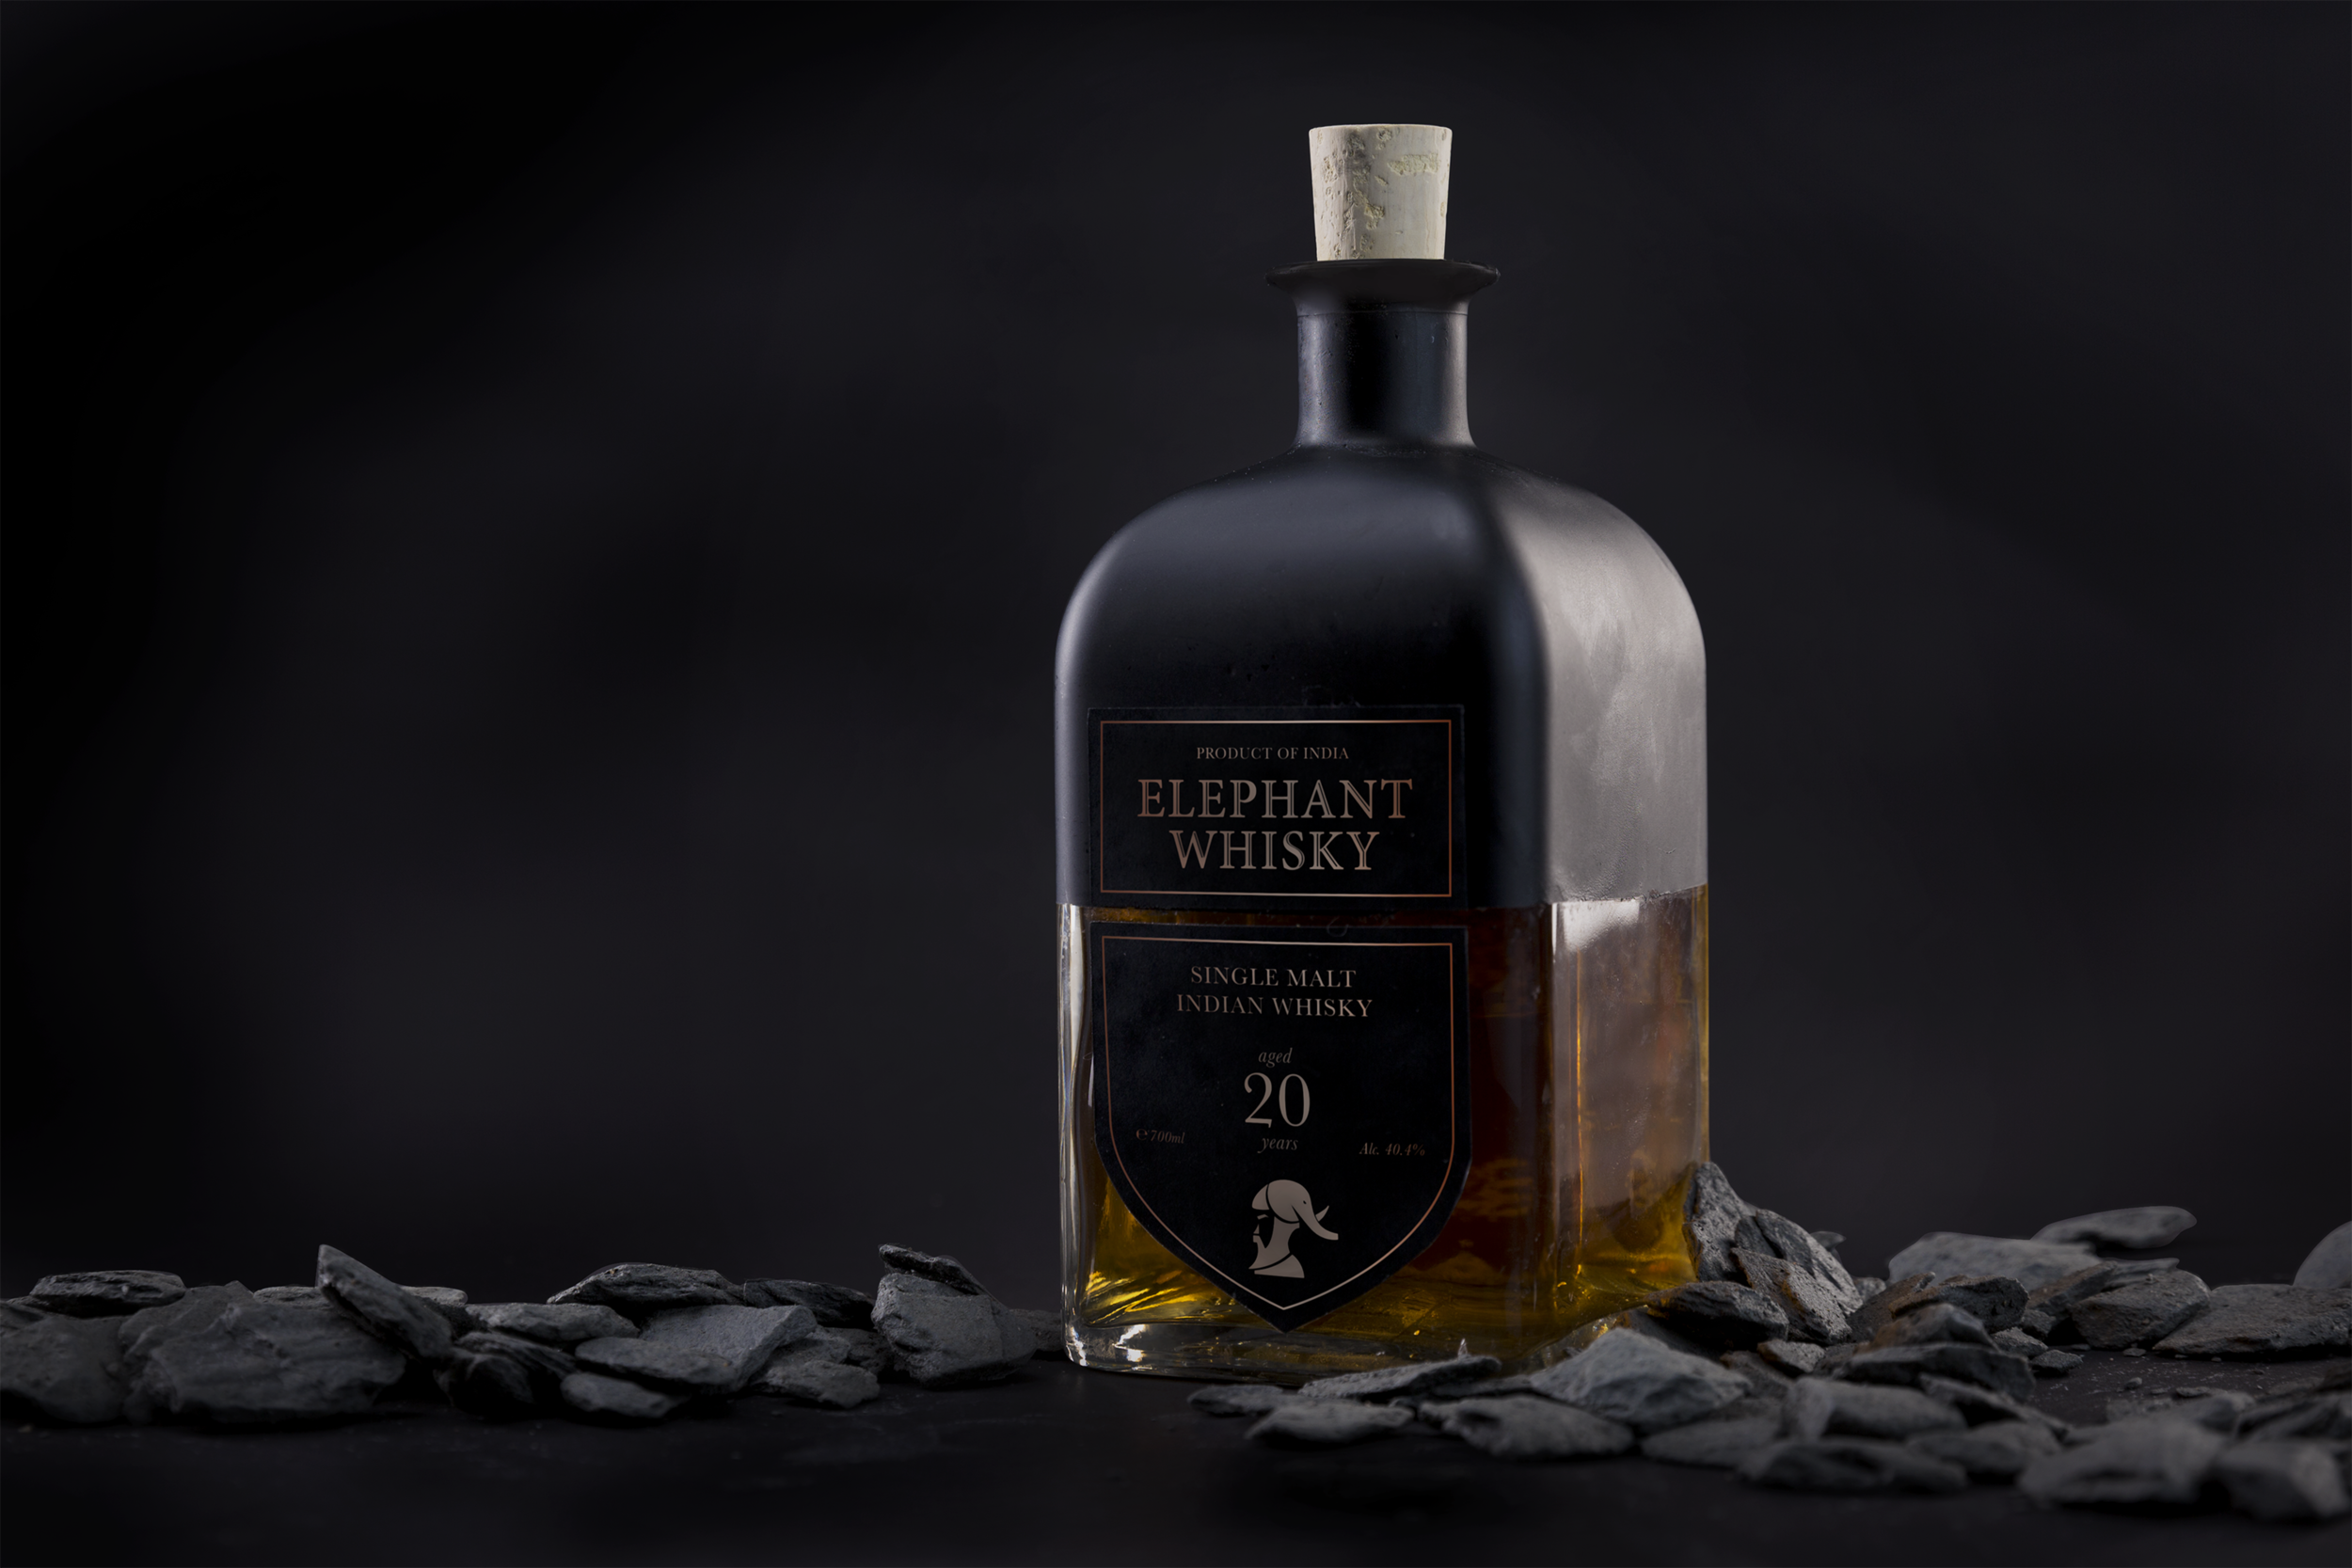 Evelyn Chee – Inspire to Strive: Elephant Whisky (Student)